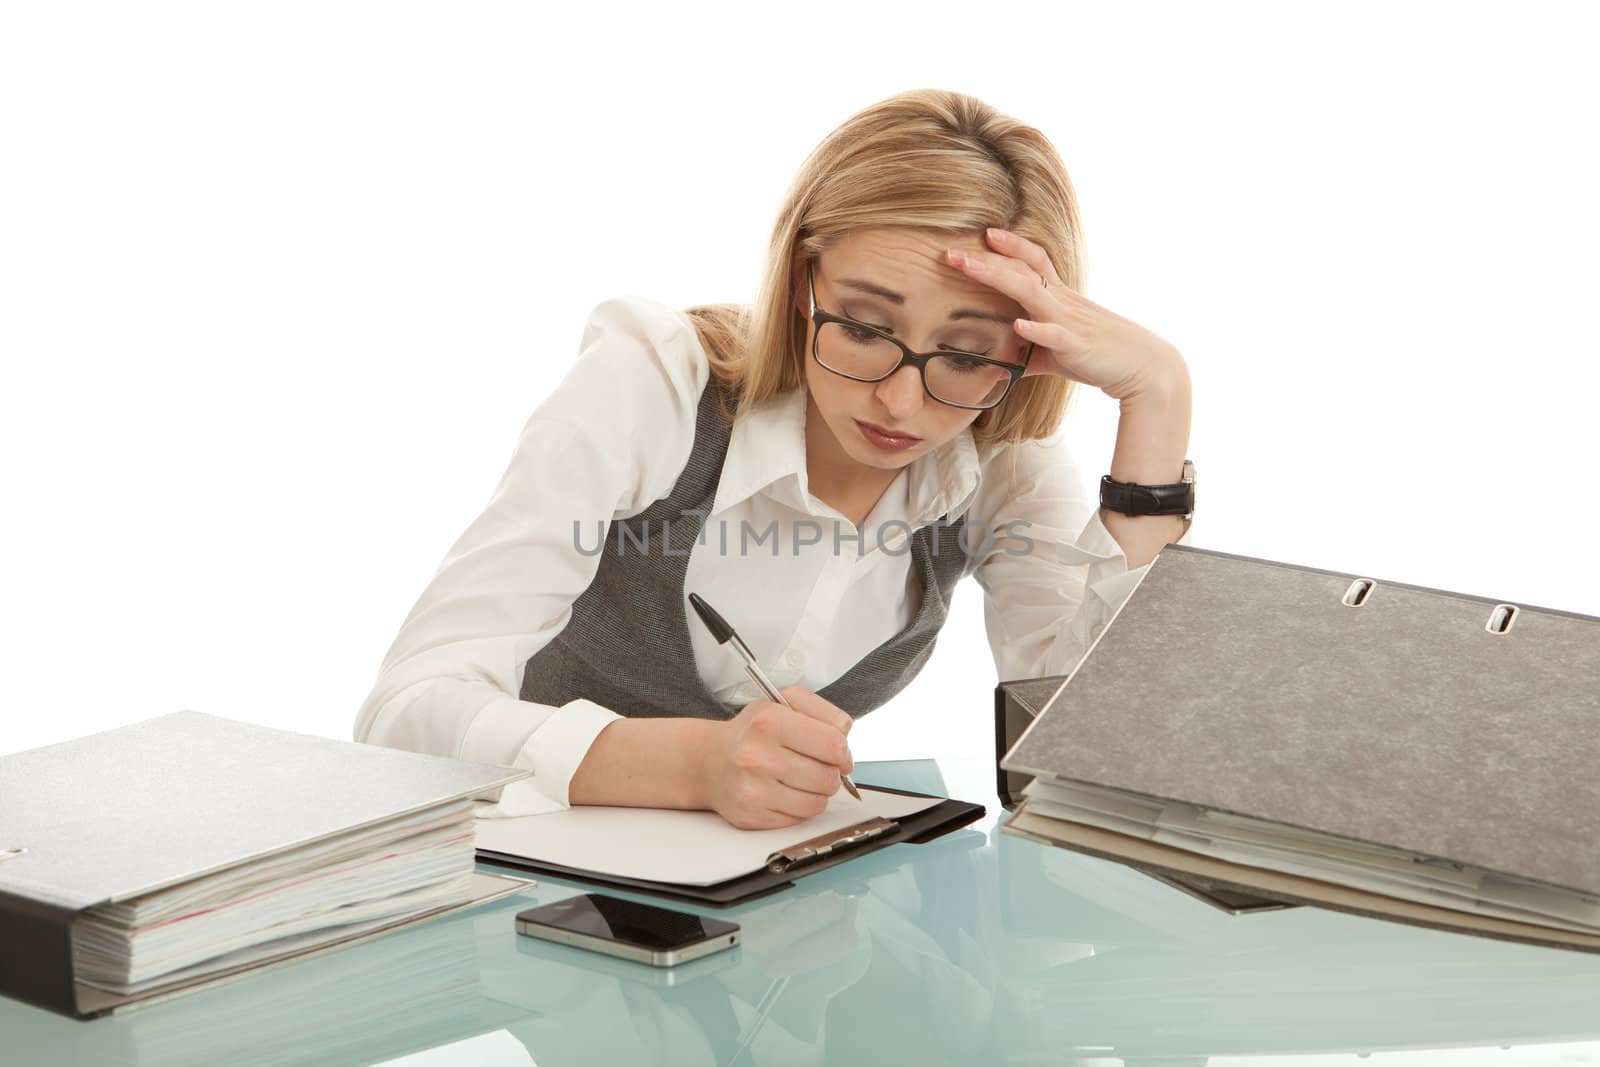 business woman with folder on desk workin isolated on white background